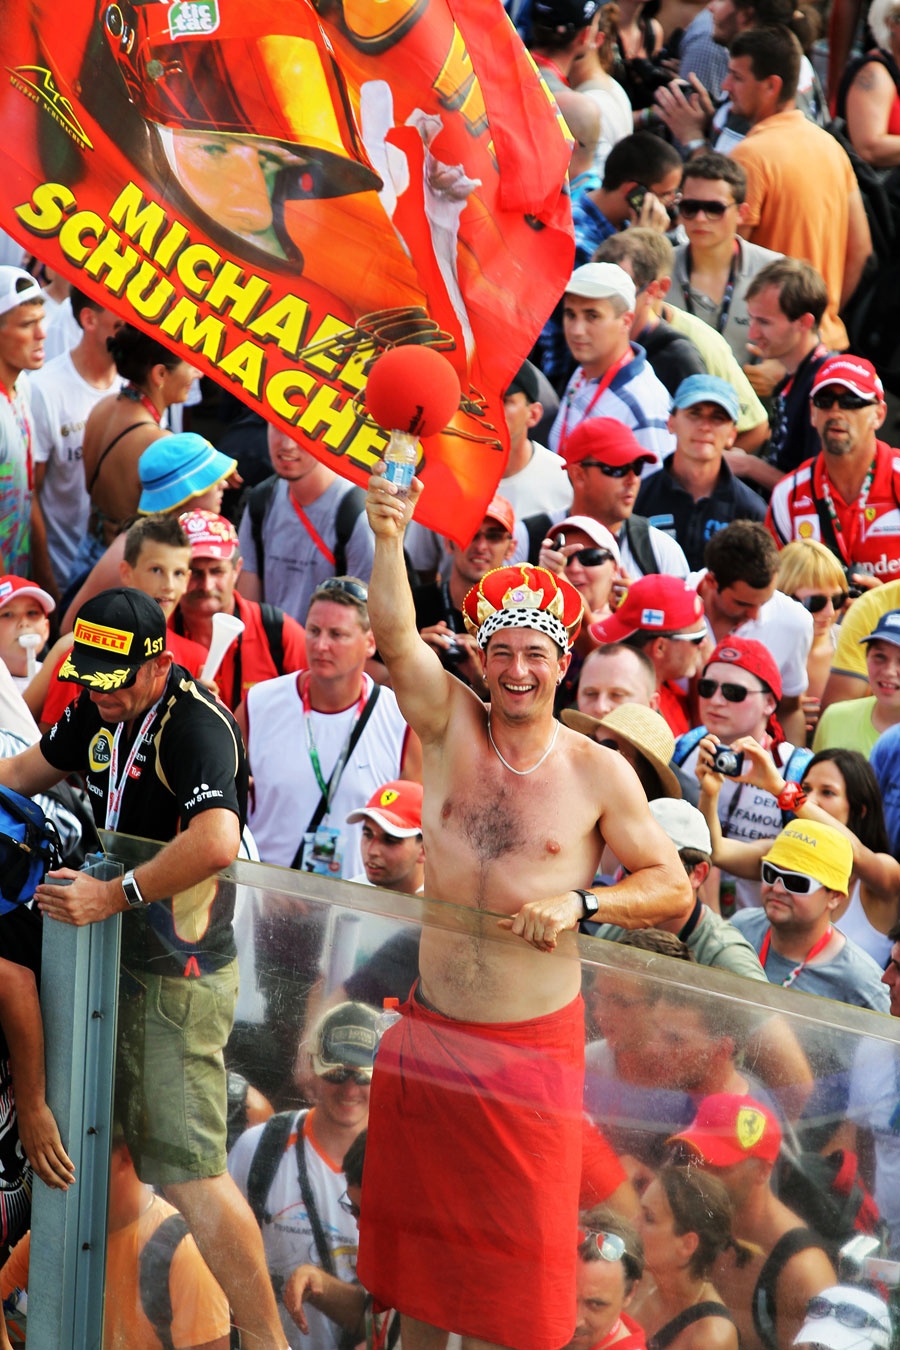 A fan enjoys himself after invading the track following the race